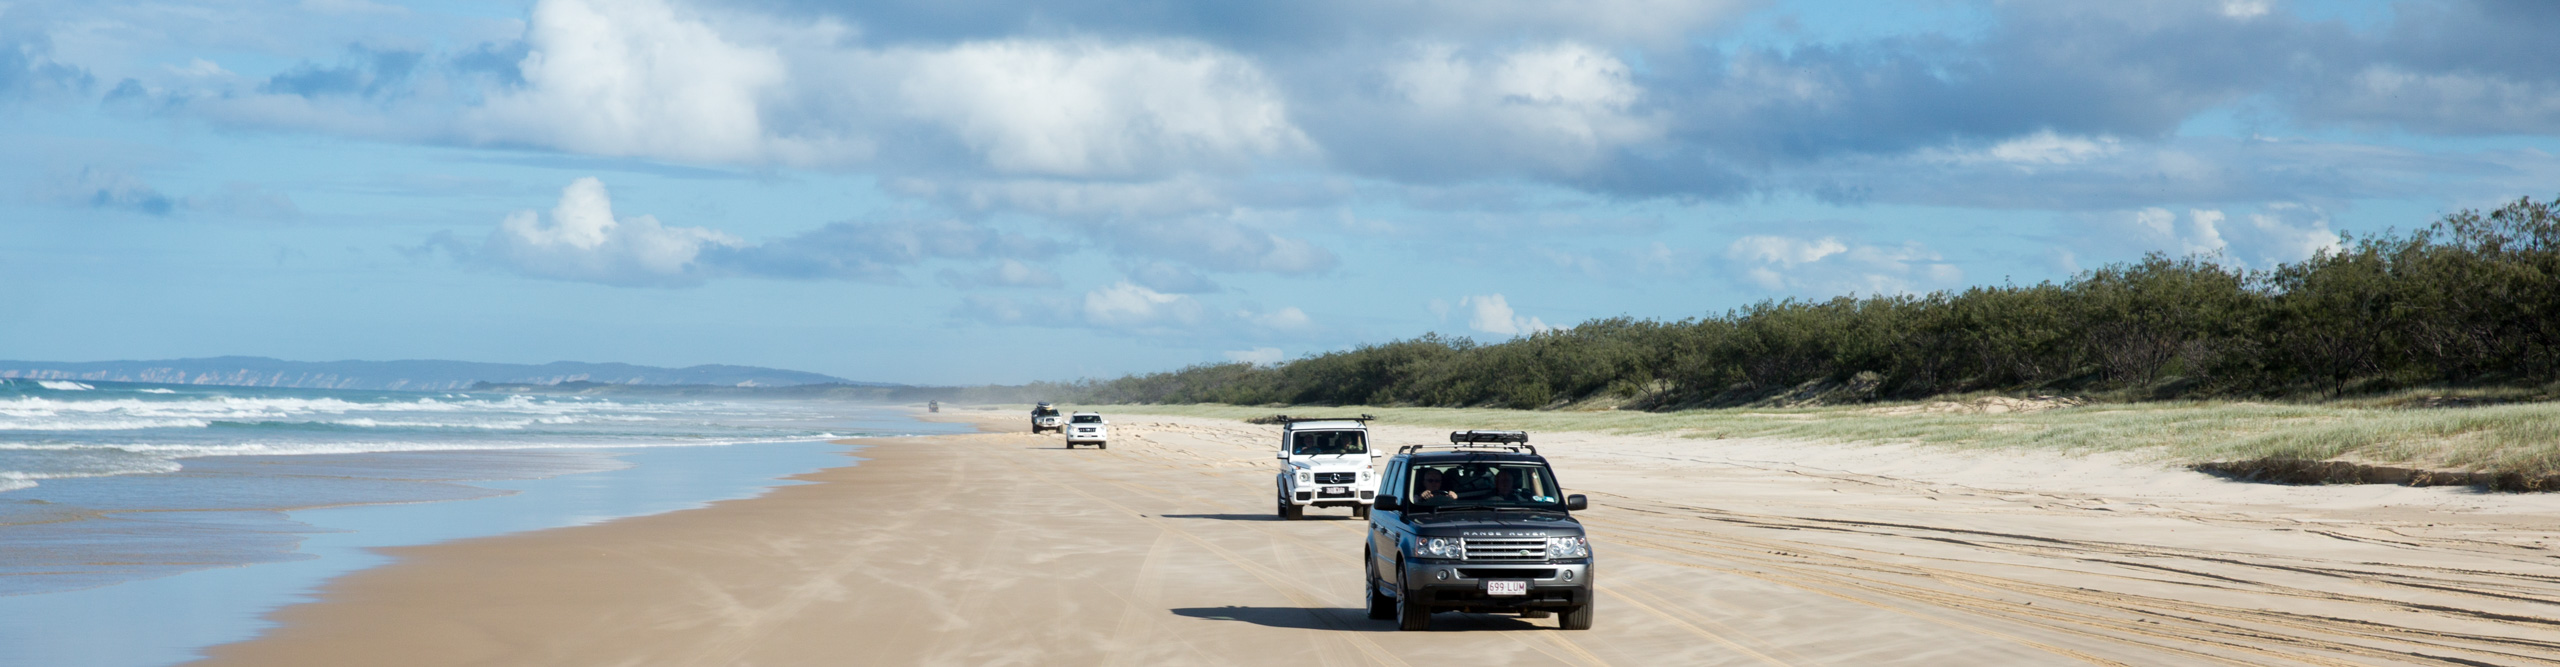 Jeeps driving along the beach on a sunny day on Fraser Island, Queensland, Australia